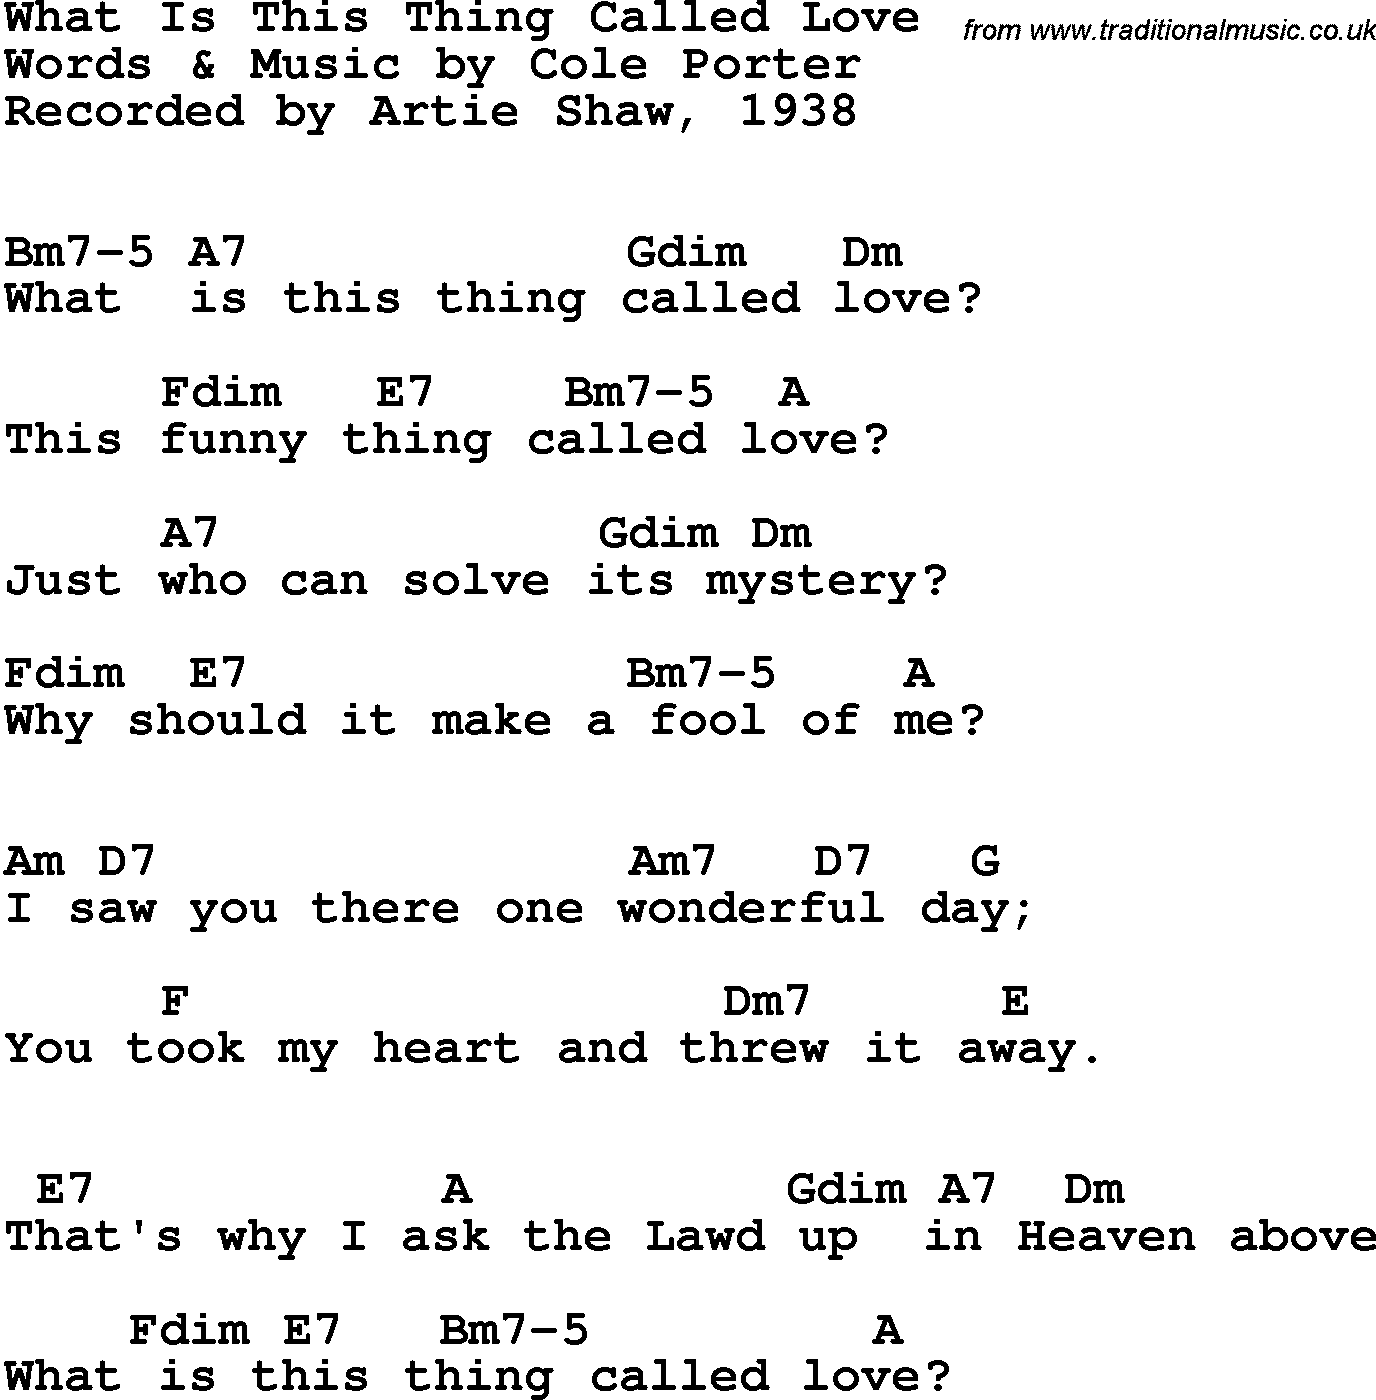 Song Lyrics with guitar chords for What Is This Thing Called Love - Artie Shaw, 1938